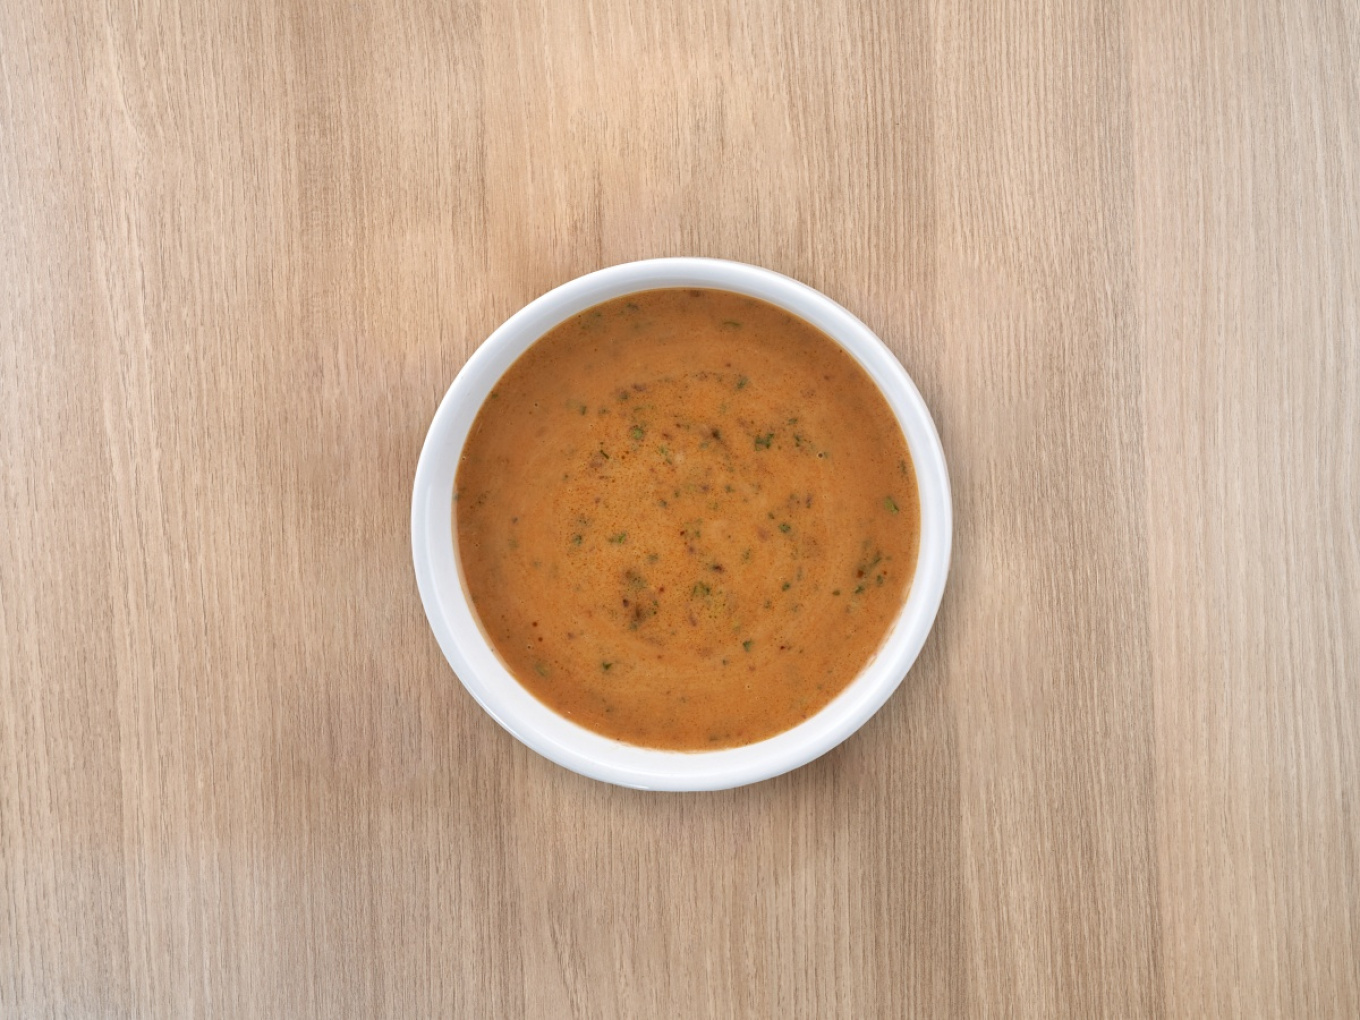 Roasted Sesame and Spicy Coriander Dipping Sauce